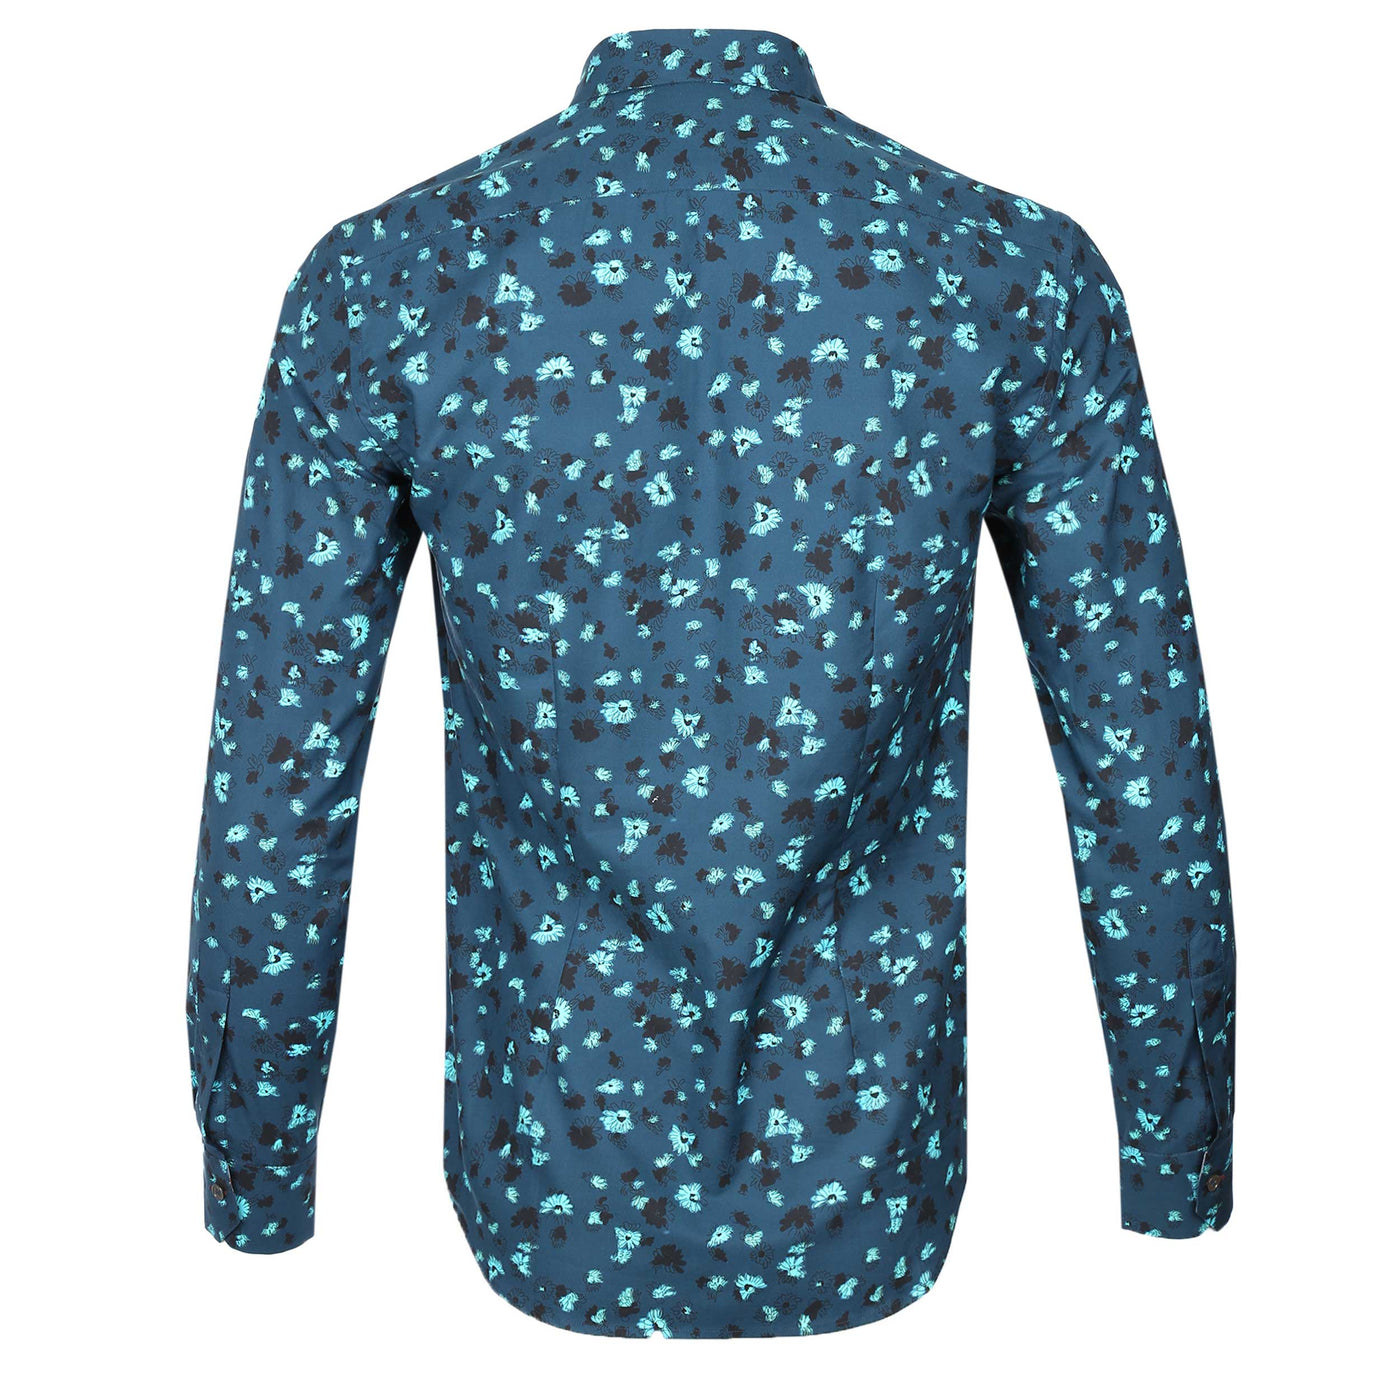 Paul Smith Floral Print Shirt in Blue Back